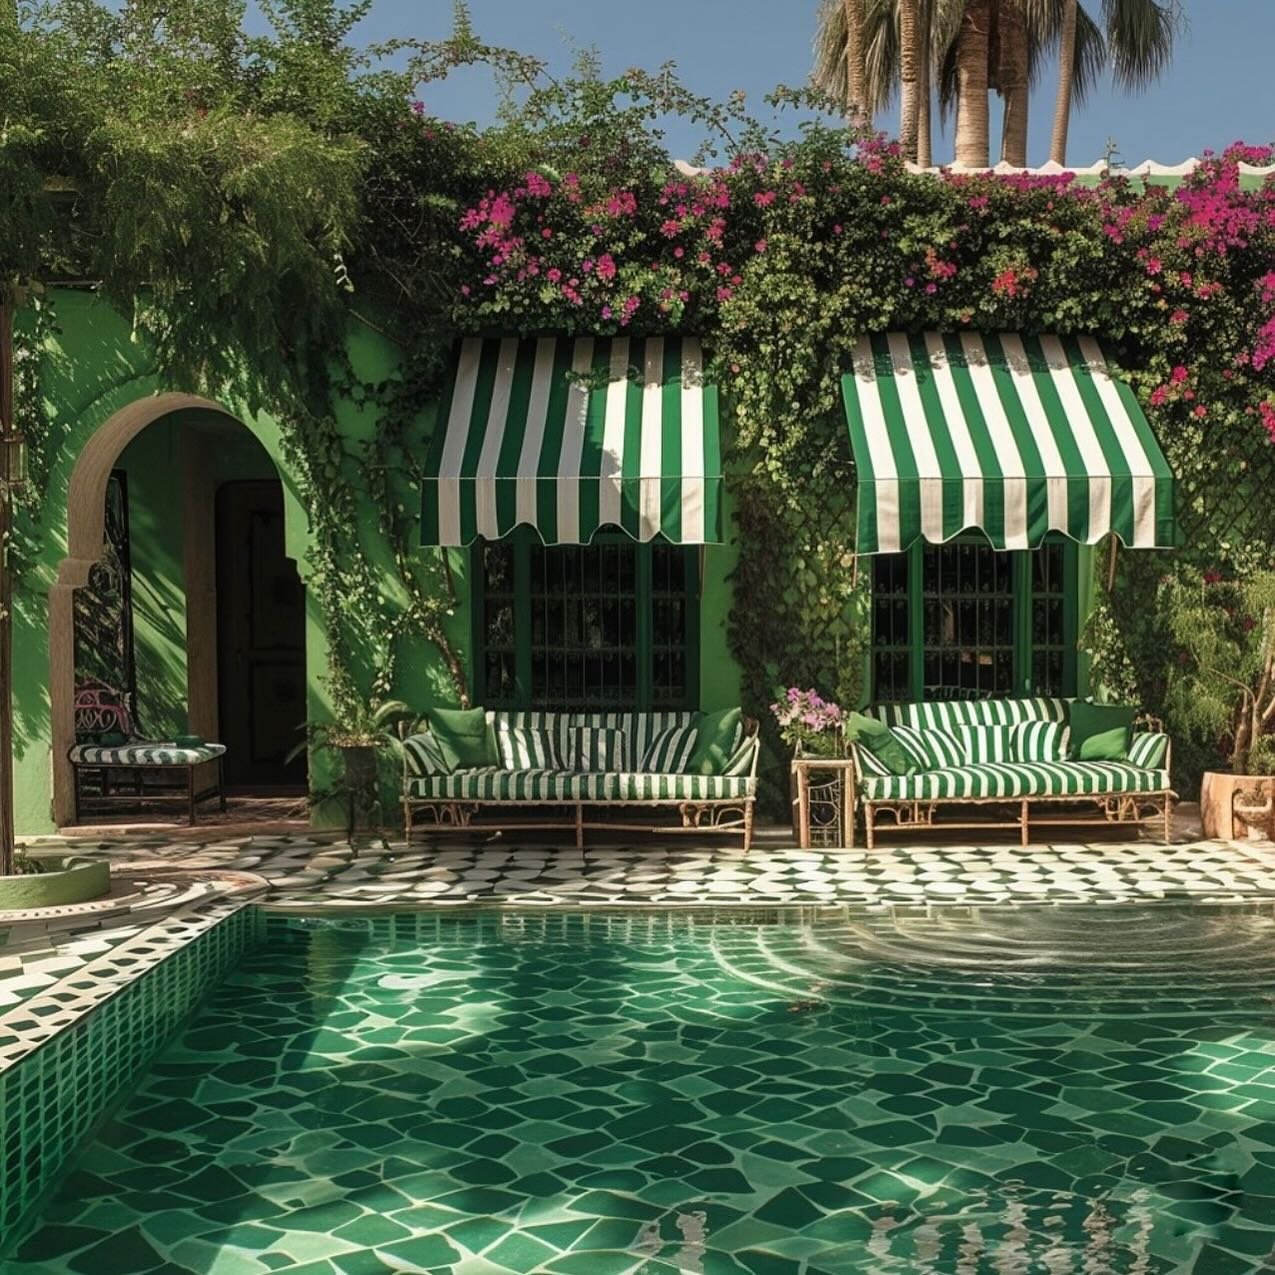 I am loving the mix of emerald with pistachio and let&rsquo;s not forget the striped awnings. What&rsquo;s your favorite part?

Outdoor inspiration c/o @baptistebohu